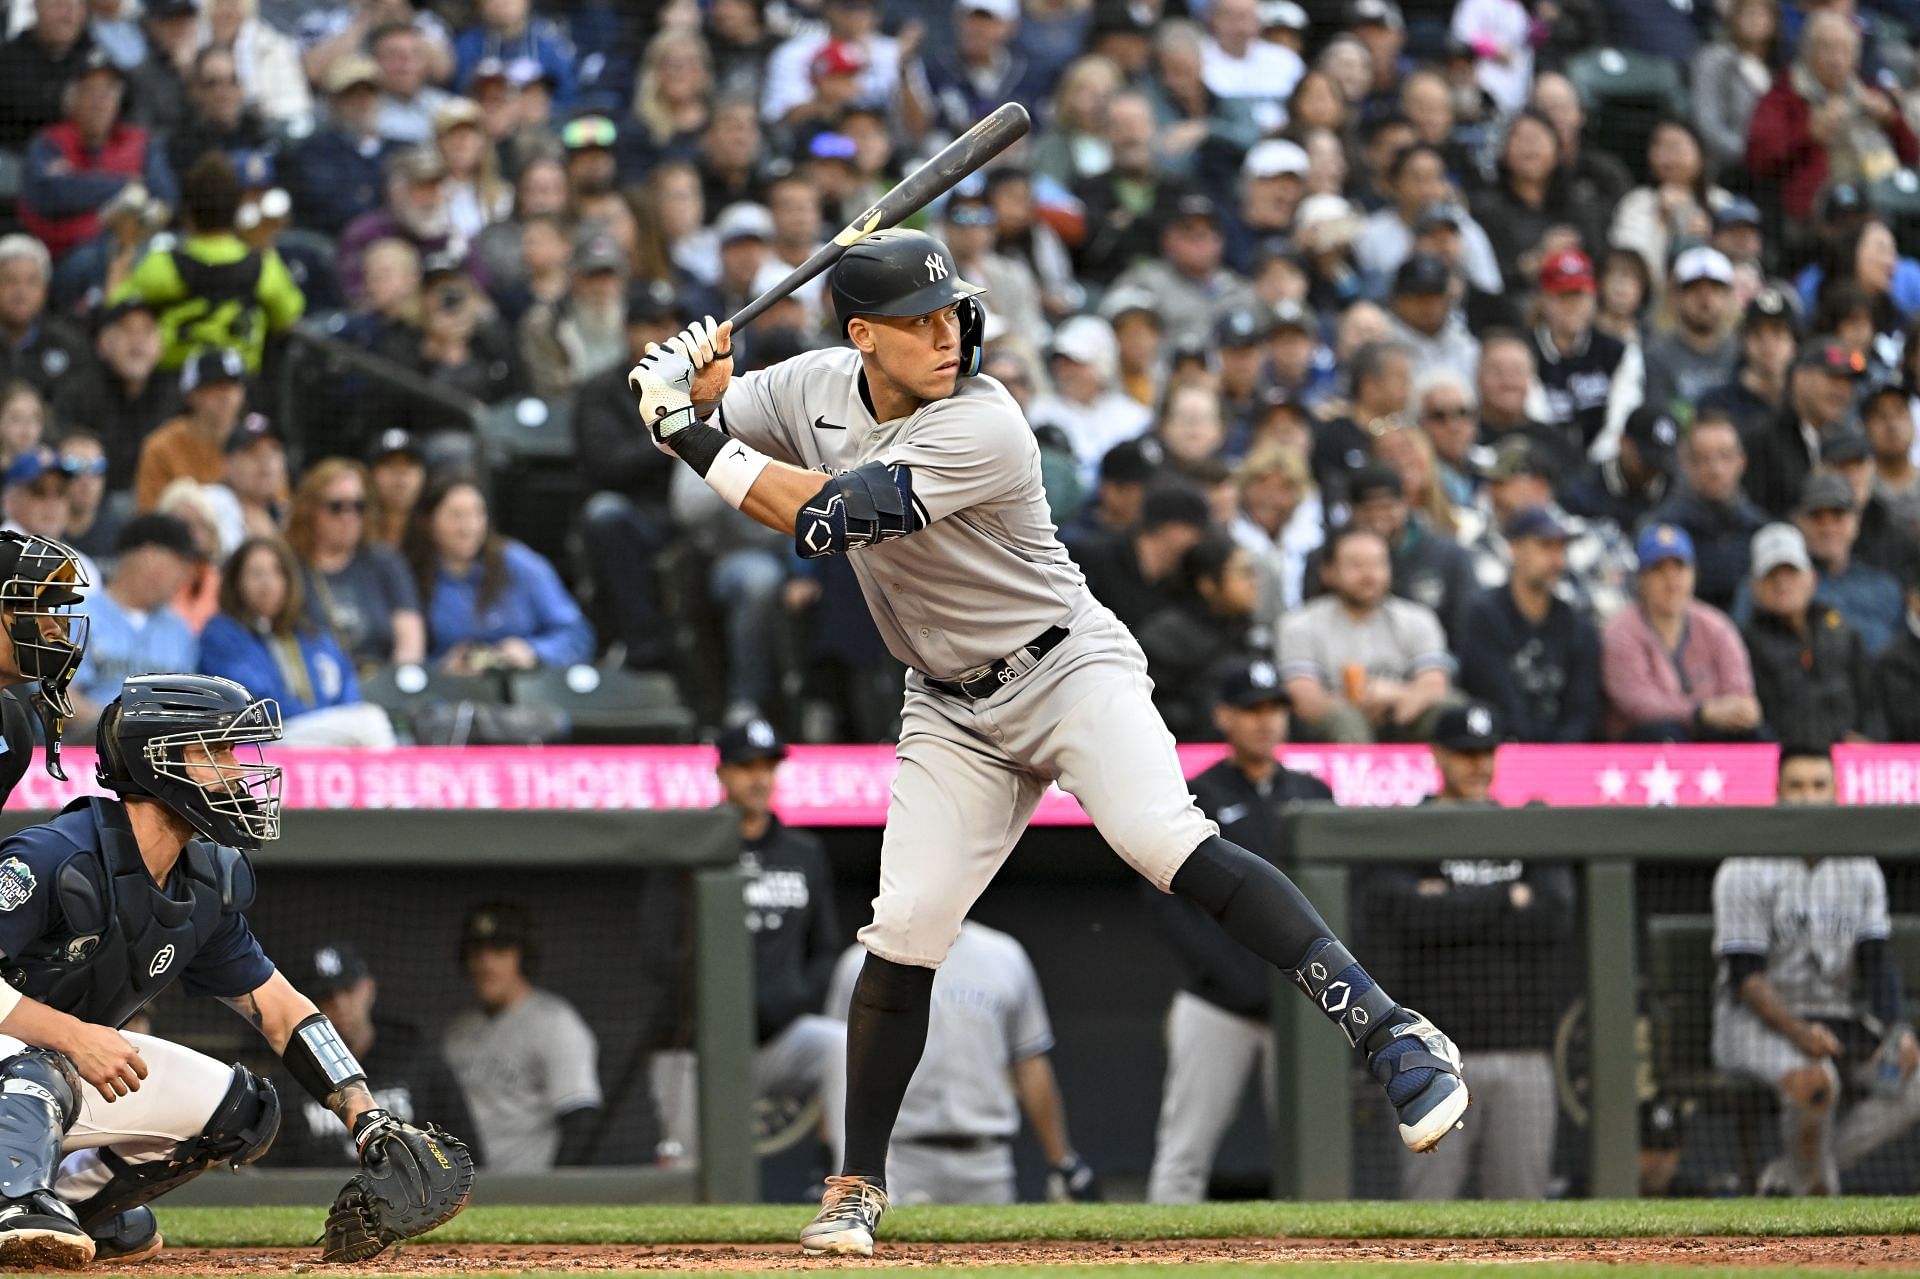 Aaron Judge of the New York Yankees bats during the second inning against the Seattle Mariners at T-Mobile Park